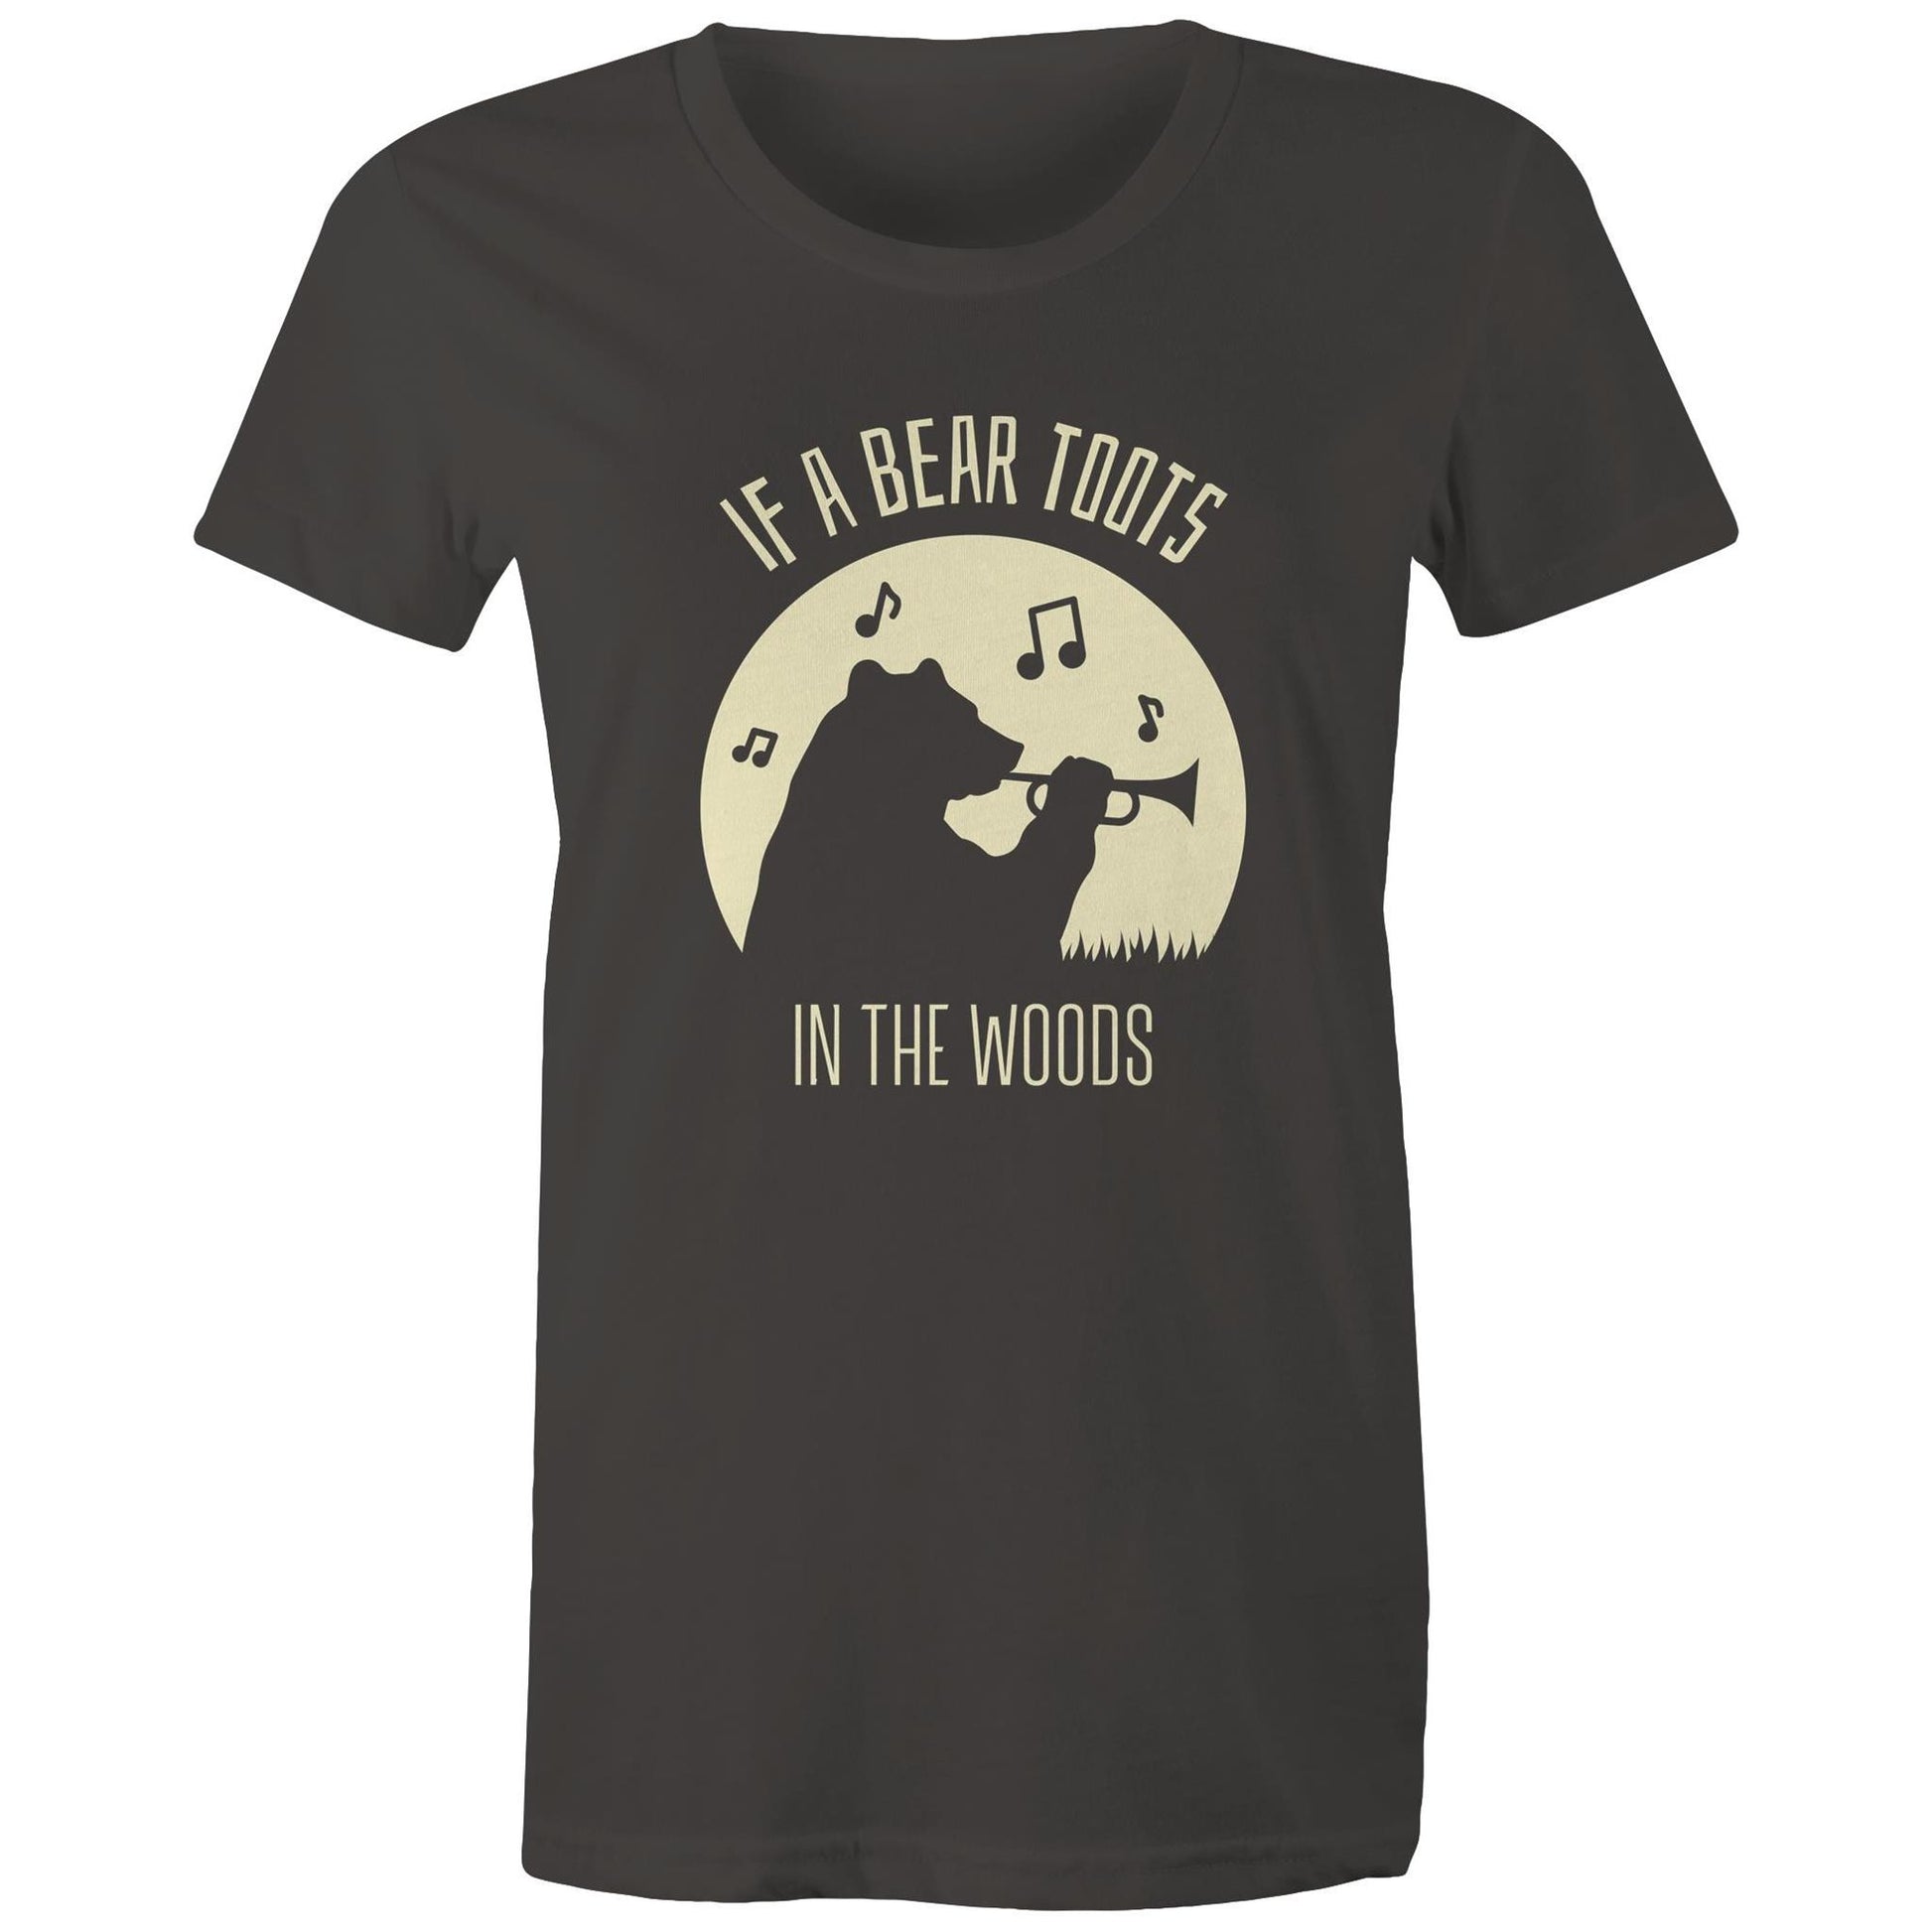 If A Bear Toots In The Woods, Trumpet Player - Womens T-shirt Charcoal Womens T-shirt animal Music